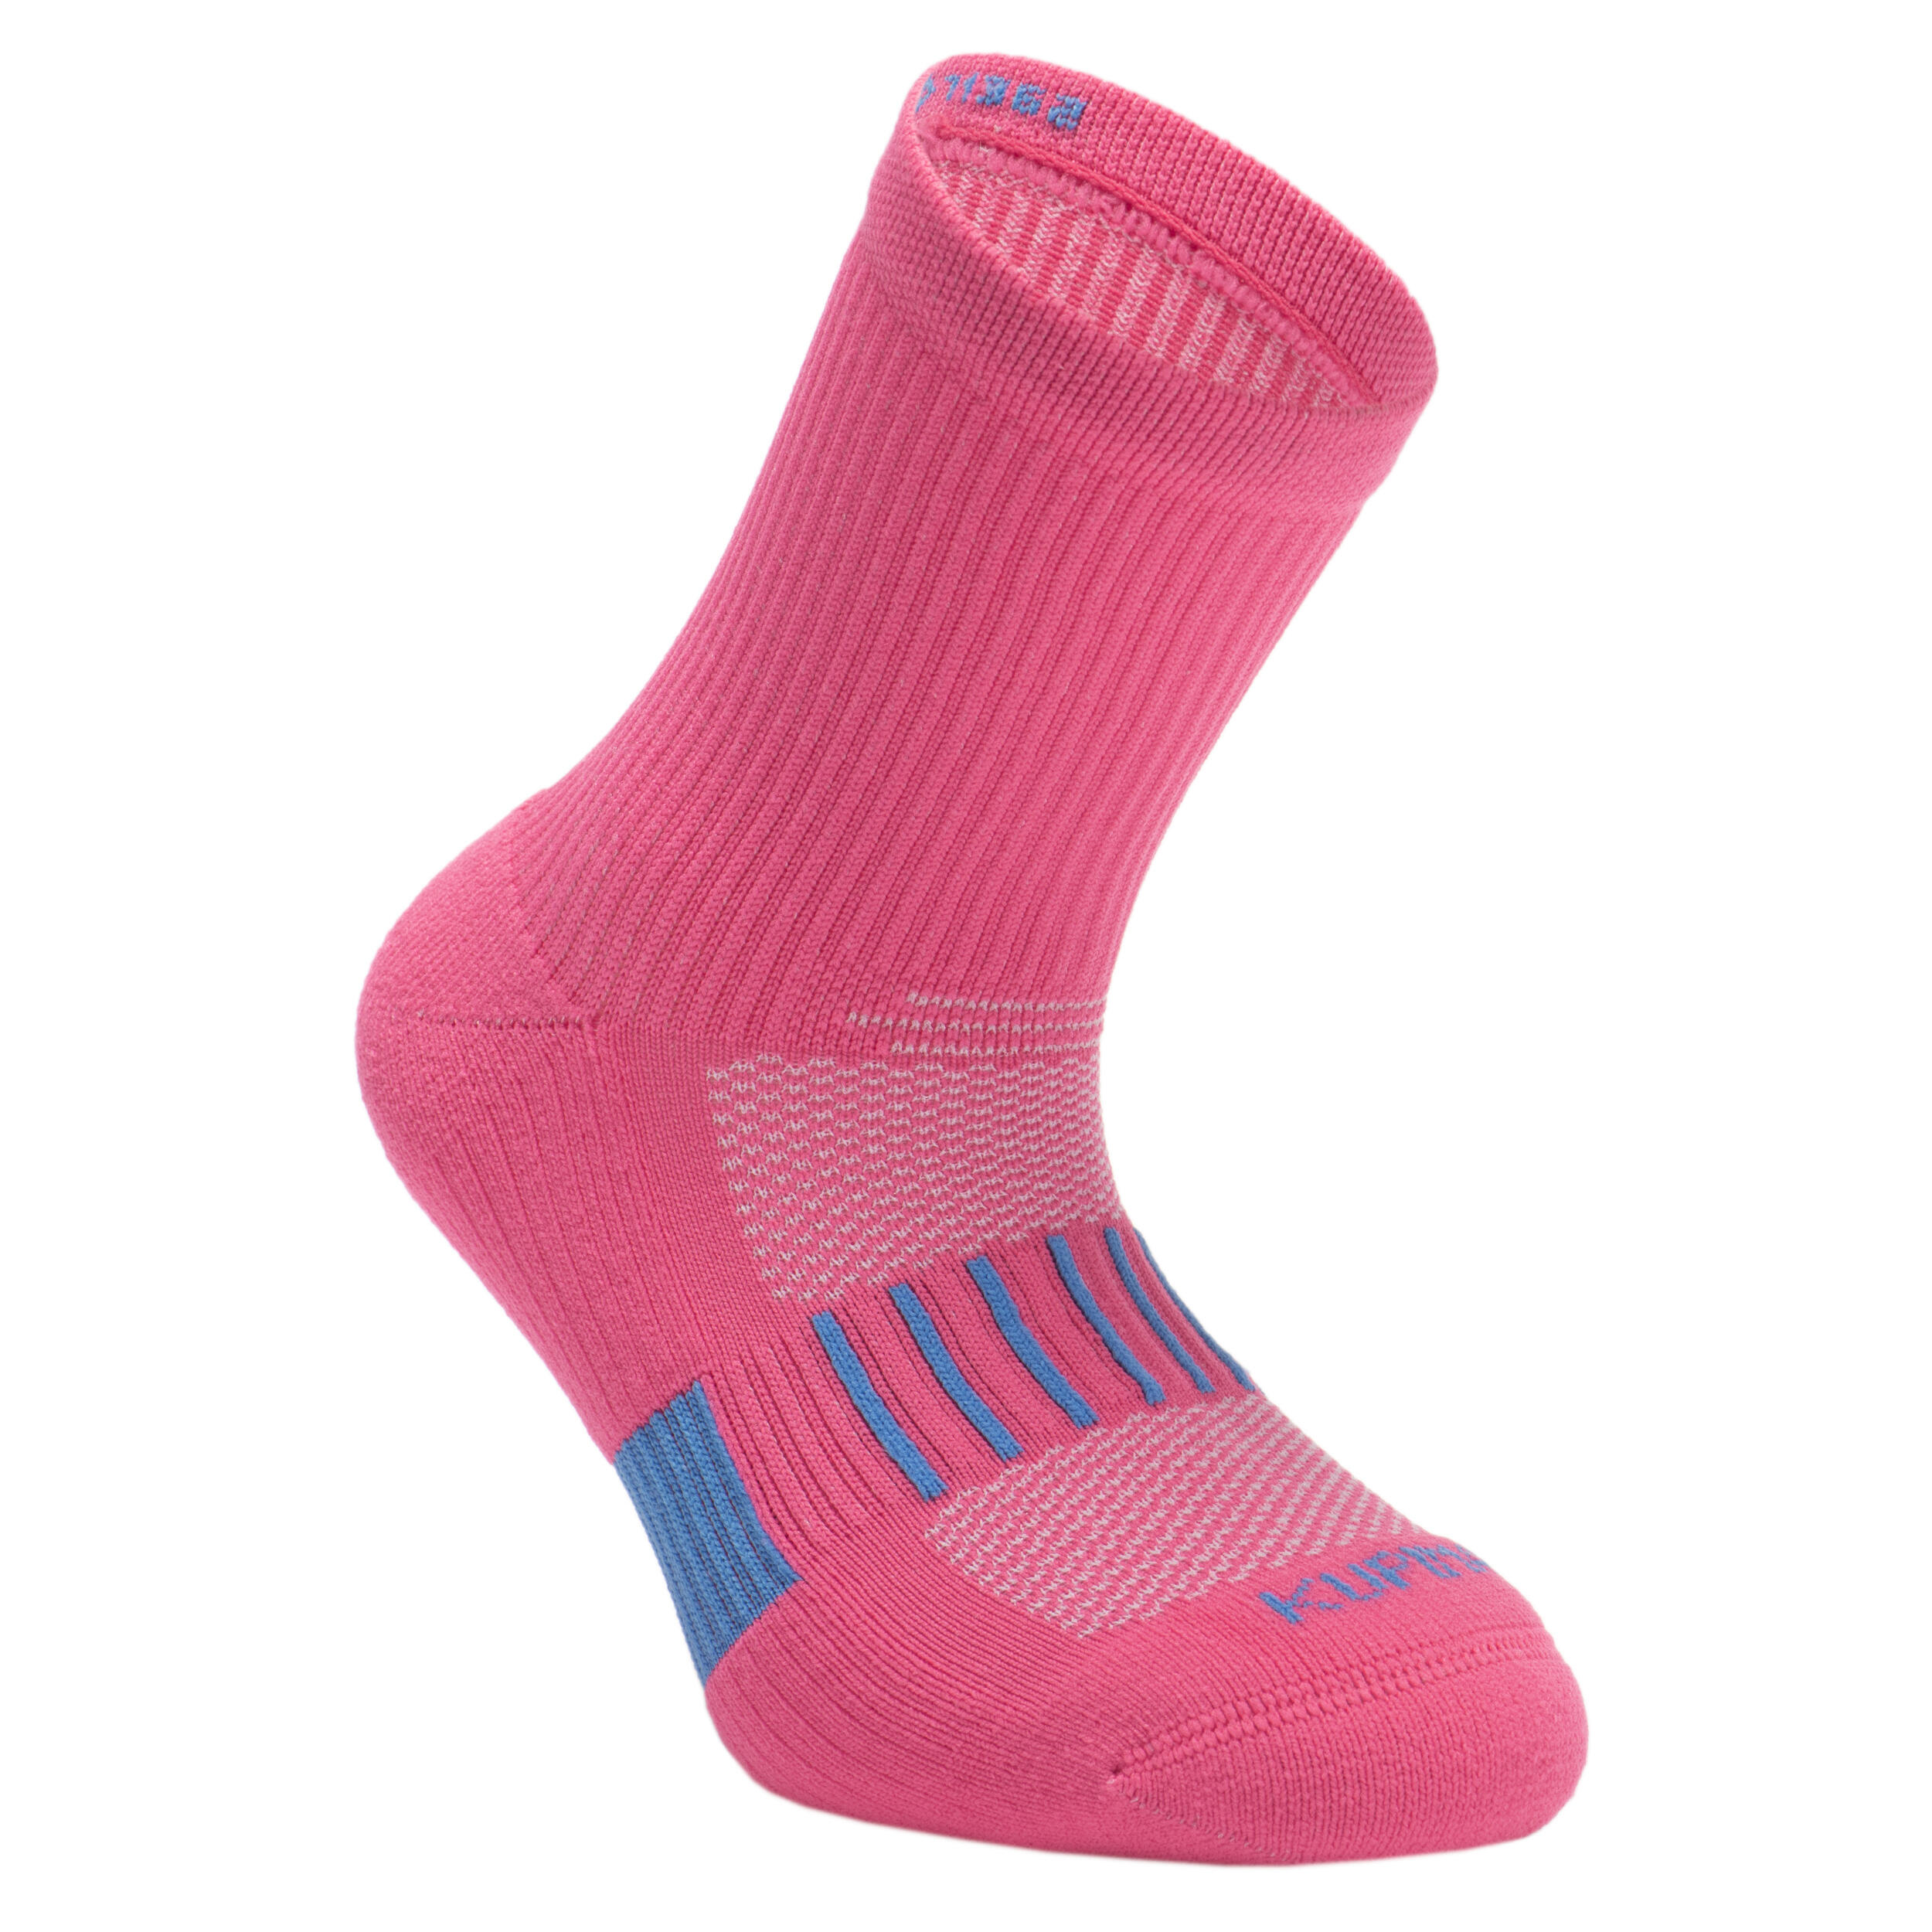 Kids' Socks AT 500 Mid 2-Pack - Plain Pink and White Pink Blue Stripes 8/13